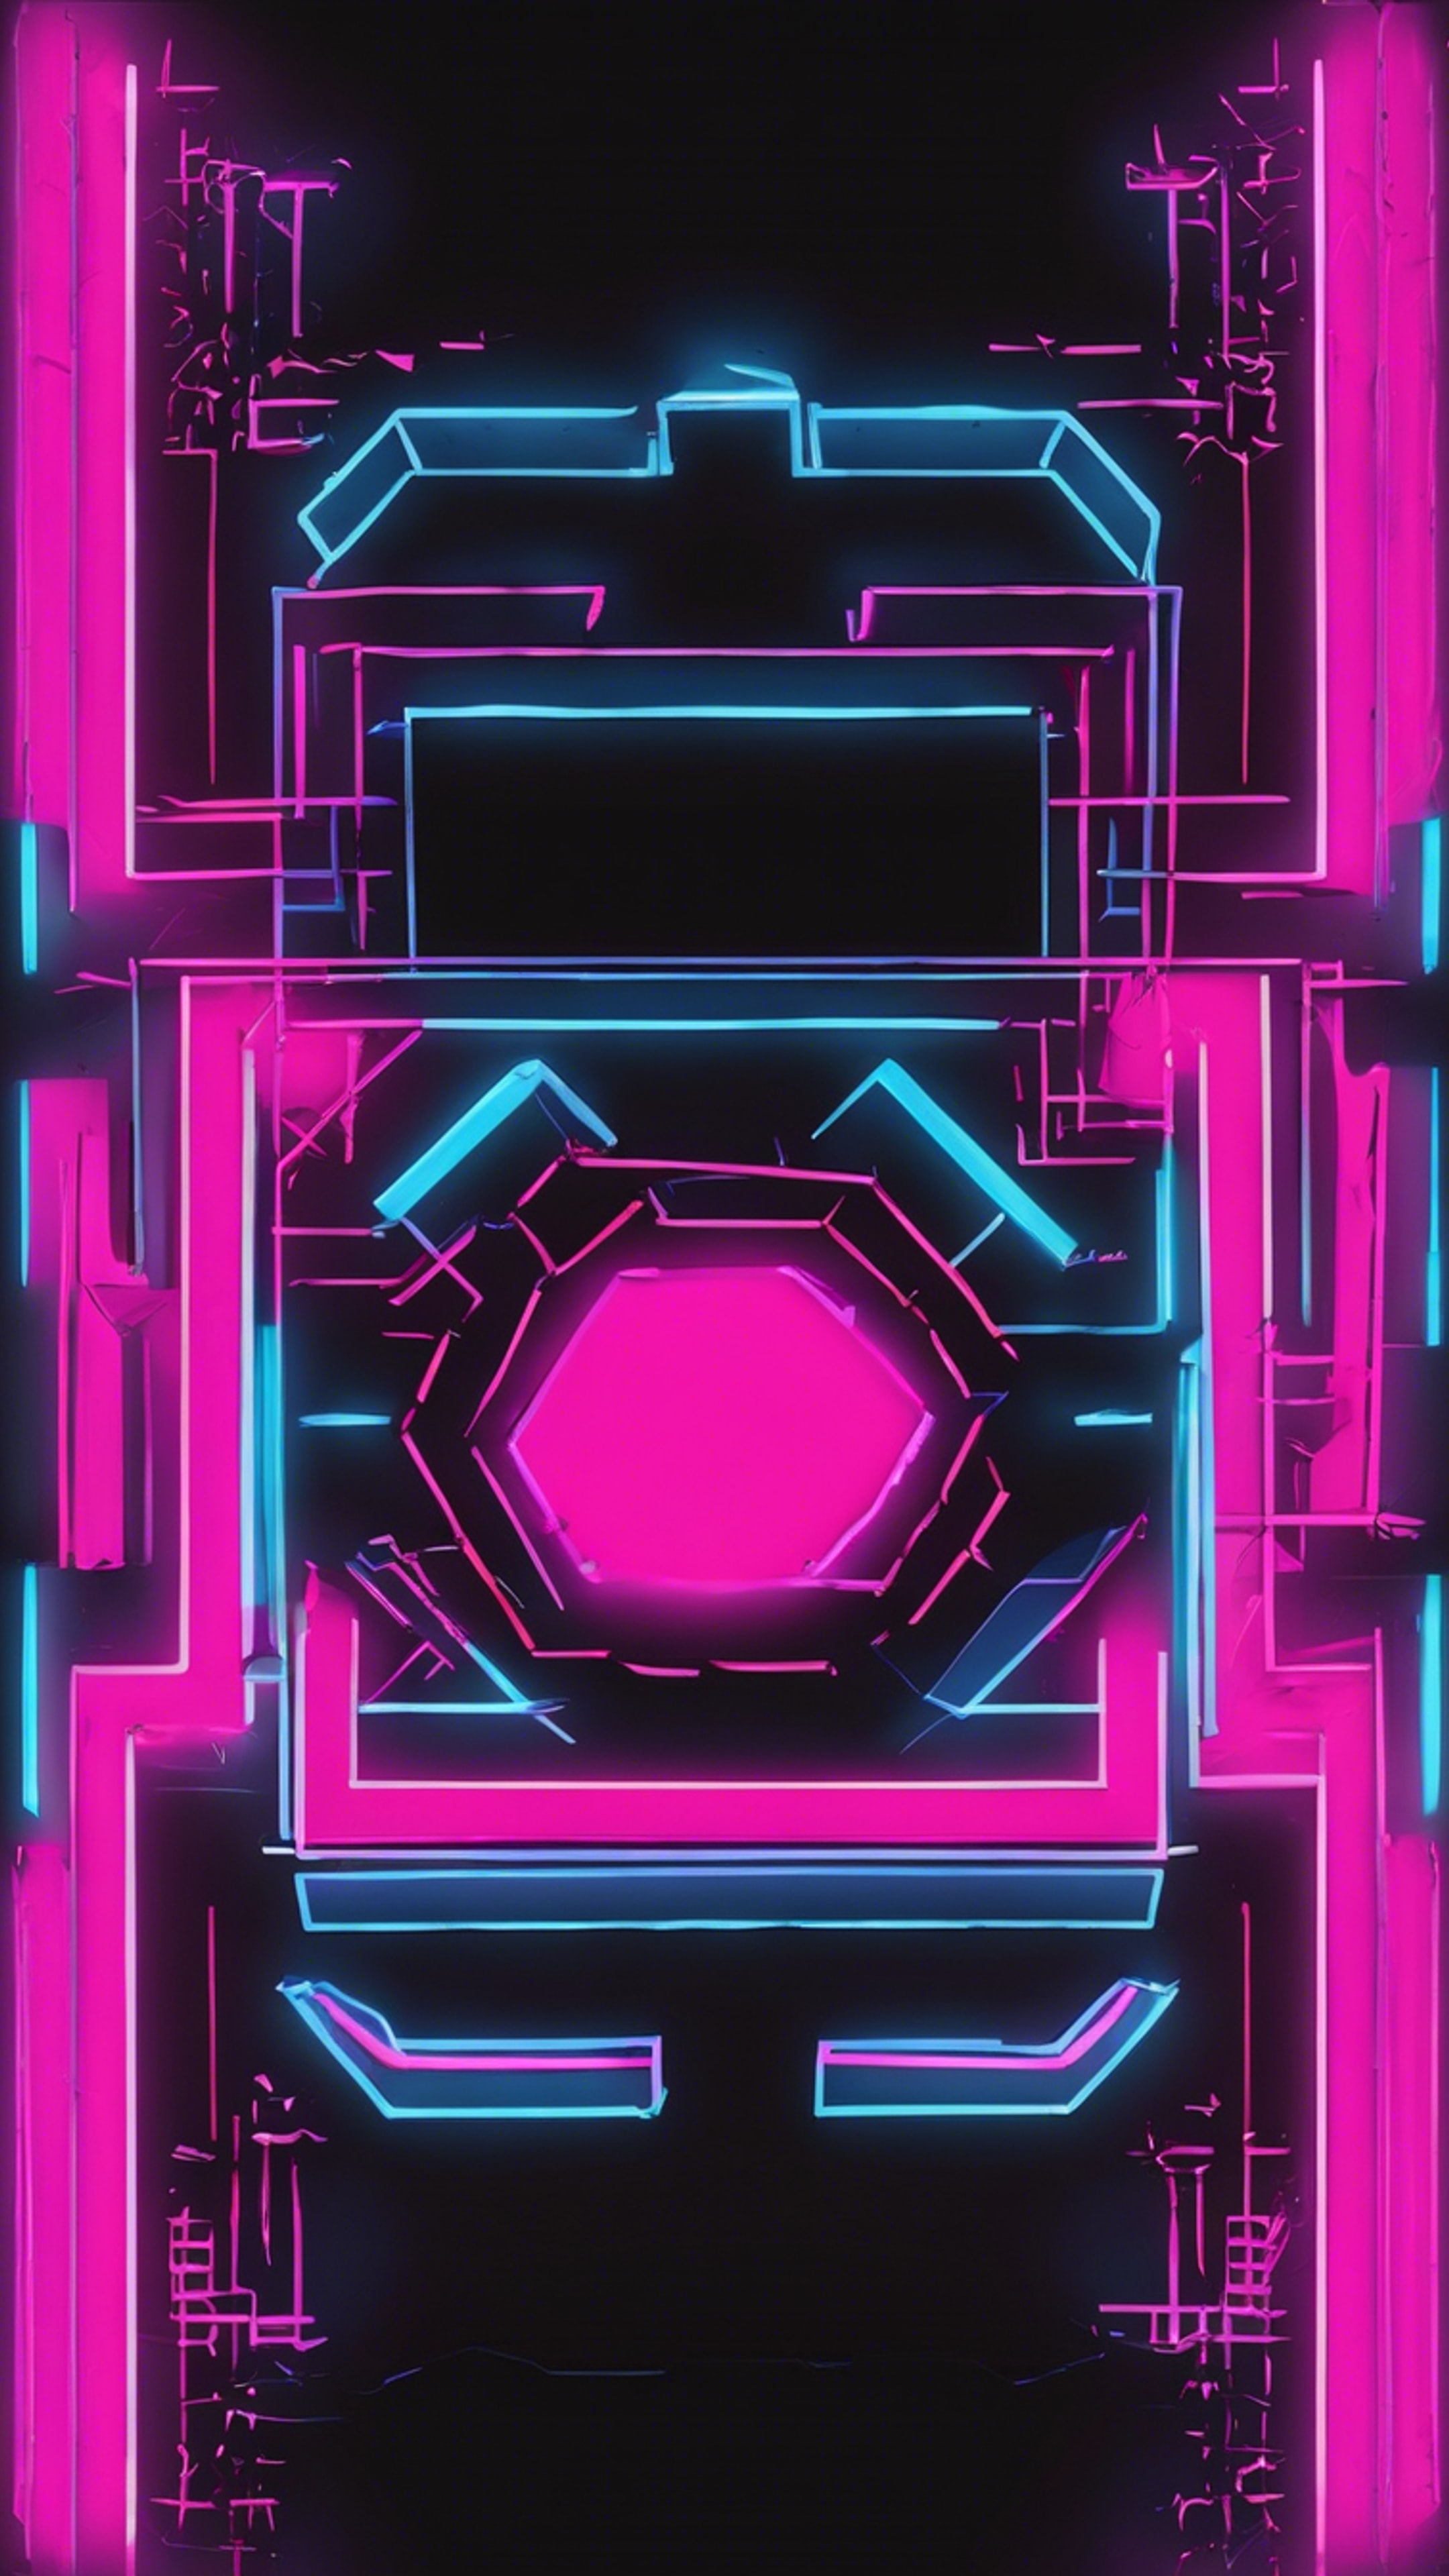 Bright neon pink and blue geometric shapes against a black background, reminiscent of 80s arcade games. 墙纸[dd42a0f55e3e425295c8]